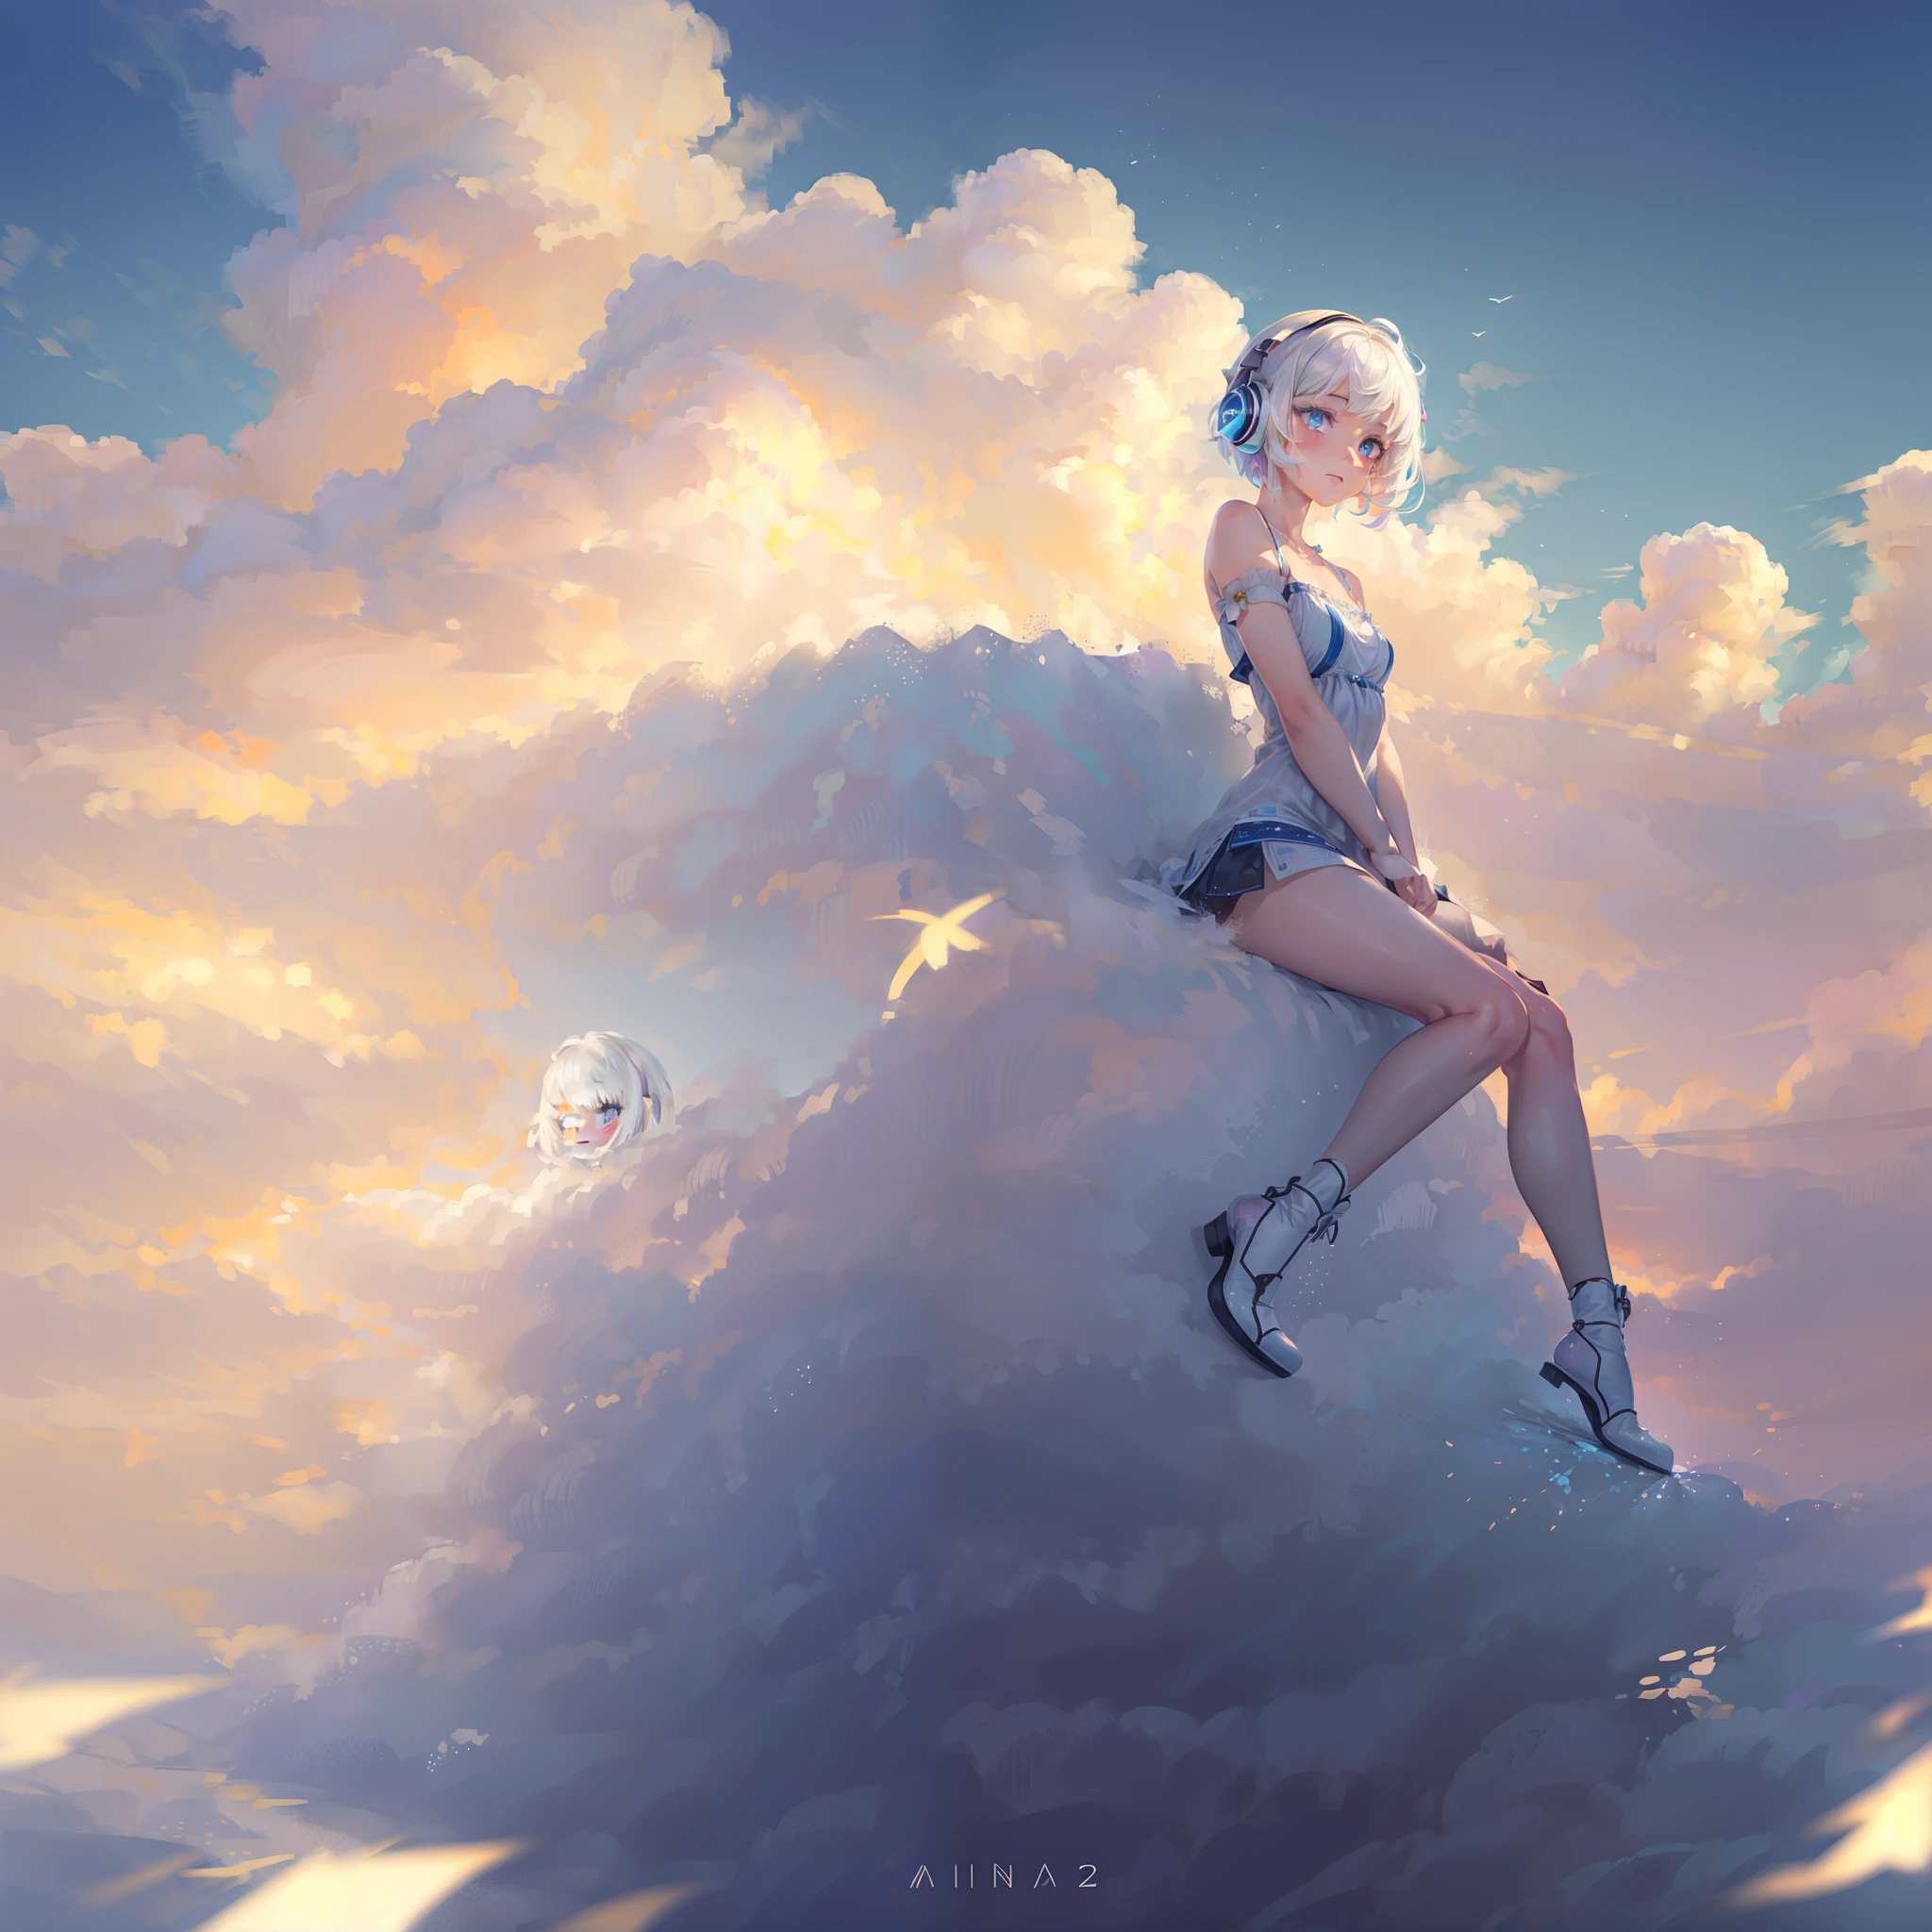 (Masterpiece), (art work),, (Detailed eyes), (Delicate skin), (heterochromatic eyes), (Multicolored), (Short white hair with bangs), (Sparkling eyes), (1girll) wearing headphone, sitting on the white clouds in the sky:1.4, Masterpiece, Best quality, Best Singing Singer, Best Illustration